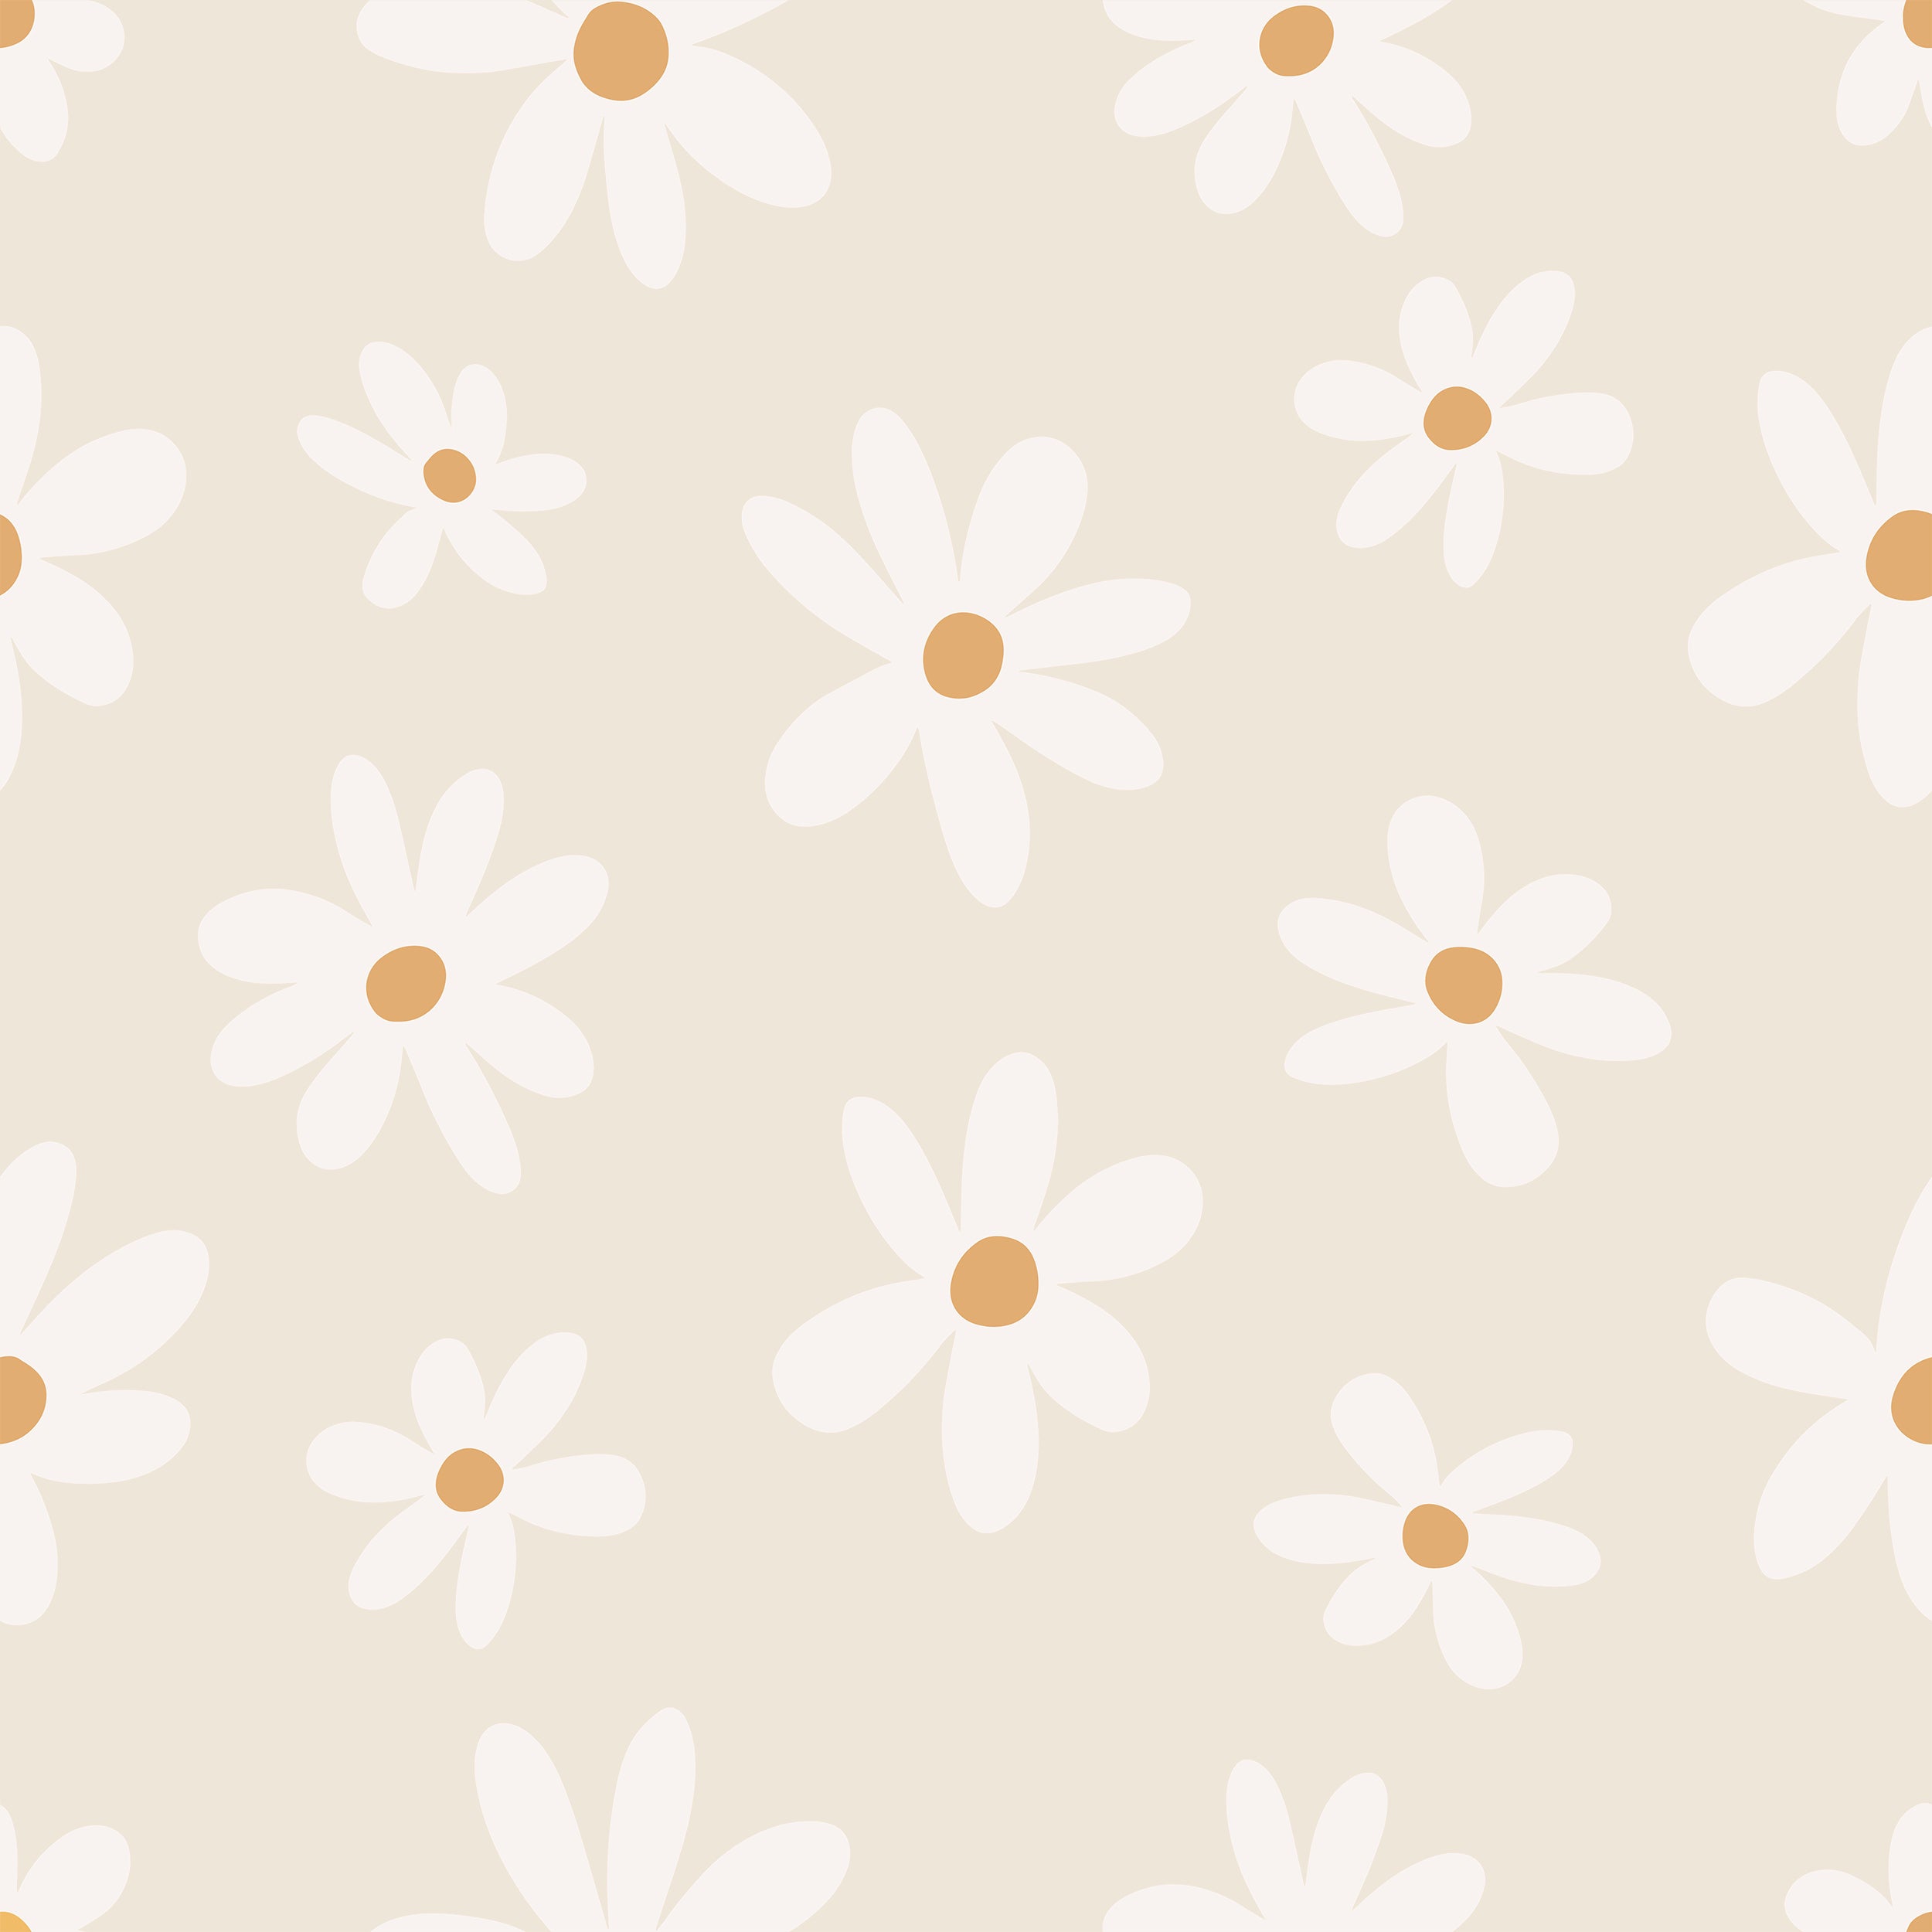 A close-up of the Simple Daisy Wallpaper, showcasing the charming daisy pattern with bright white petals and golden yellow centers, bringing a fresh and simplistic floral design to the space.